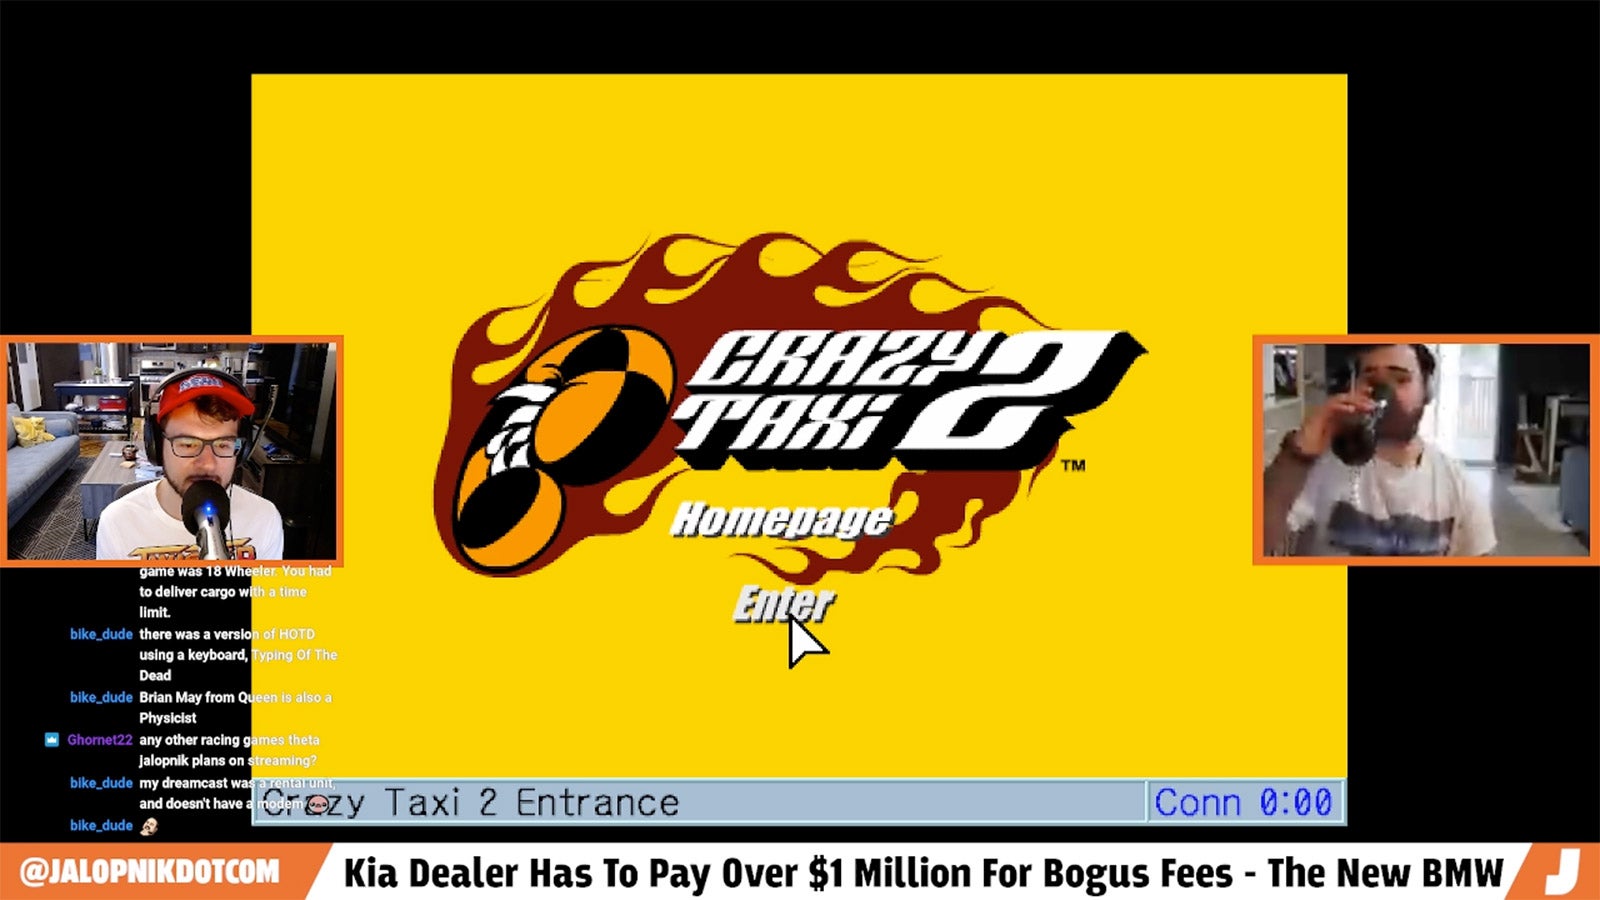 I’m Delighted to Inform You That the Crazy Taxi 2 Website Still Exists, Thanks to Dedicated Fans